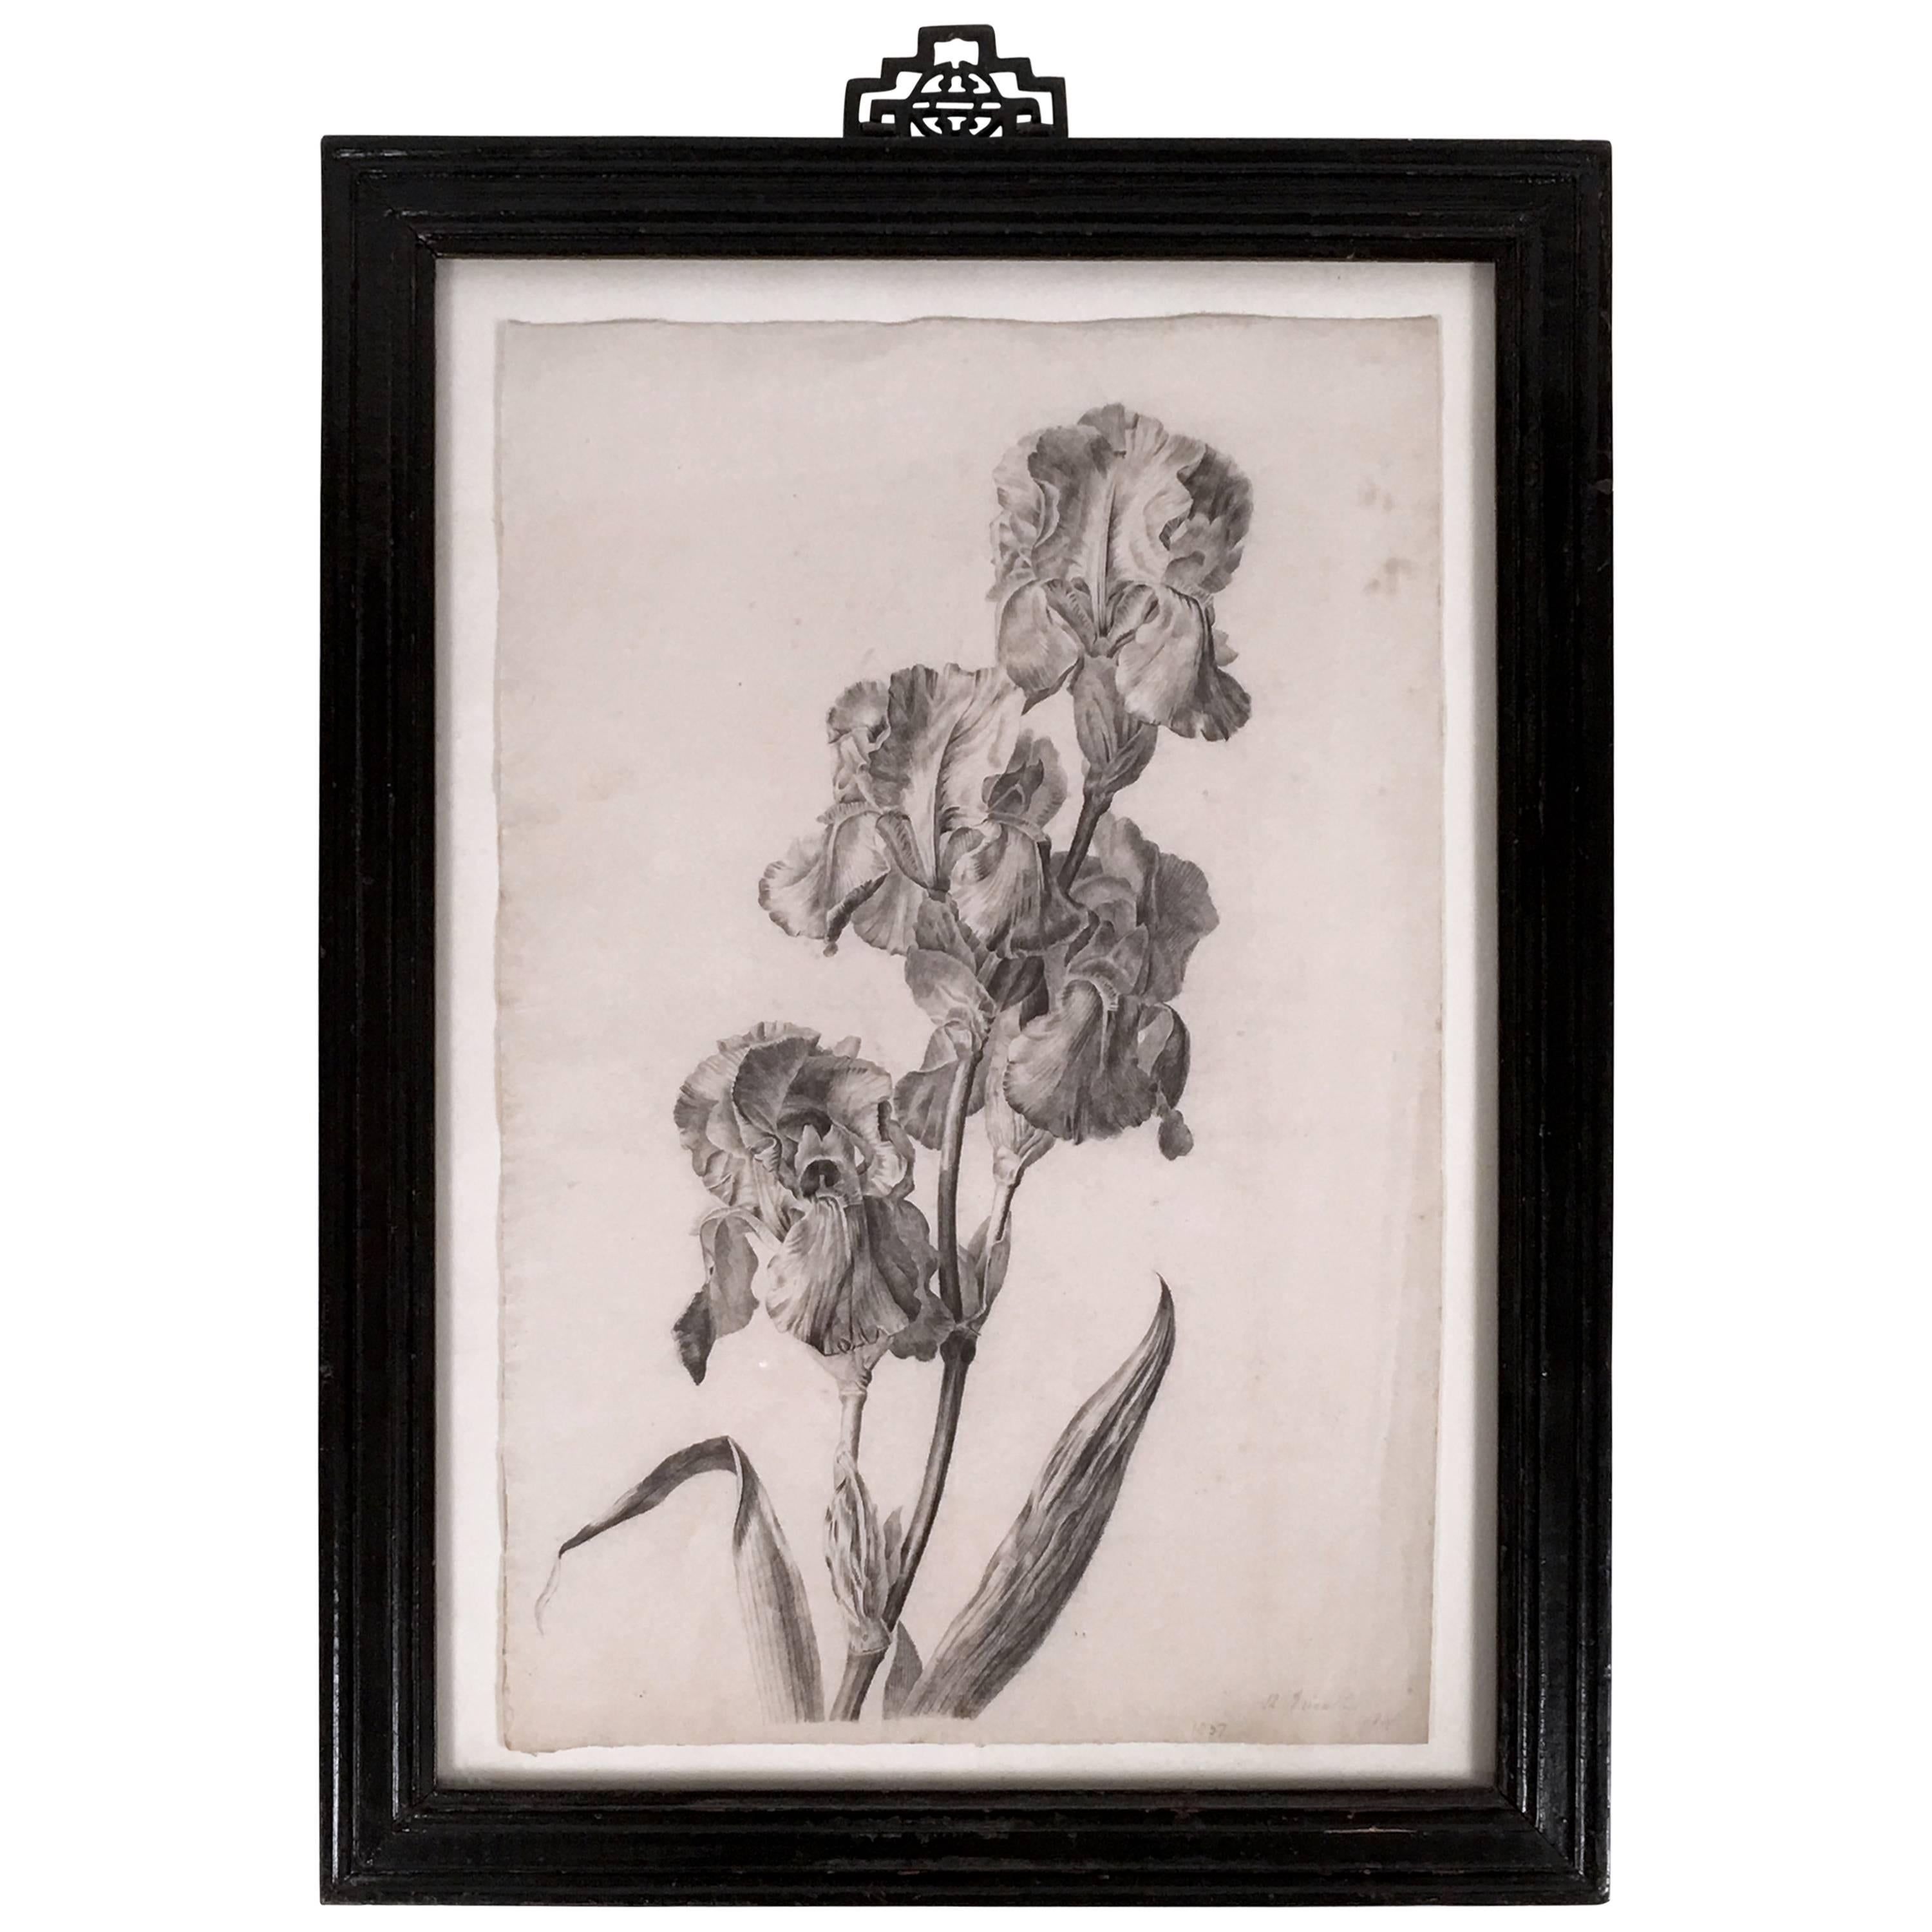 Exquisite Charcoal Drawing of Irises, circa 1837